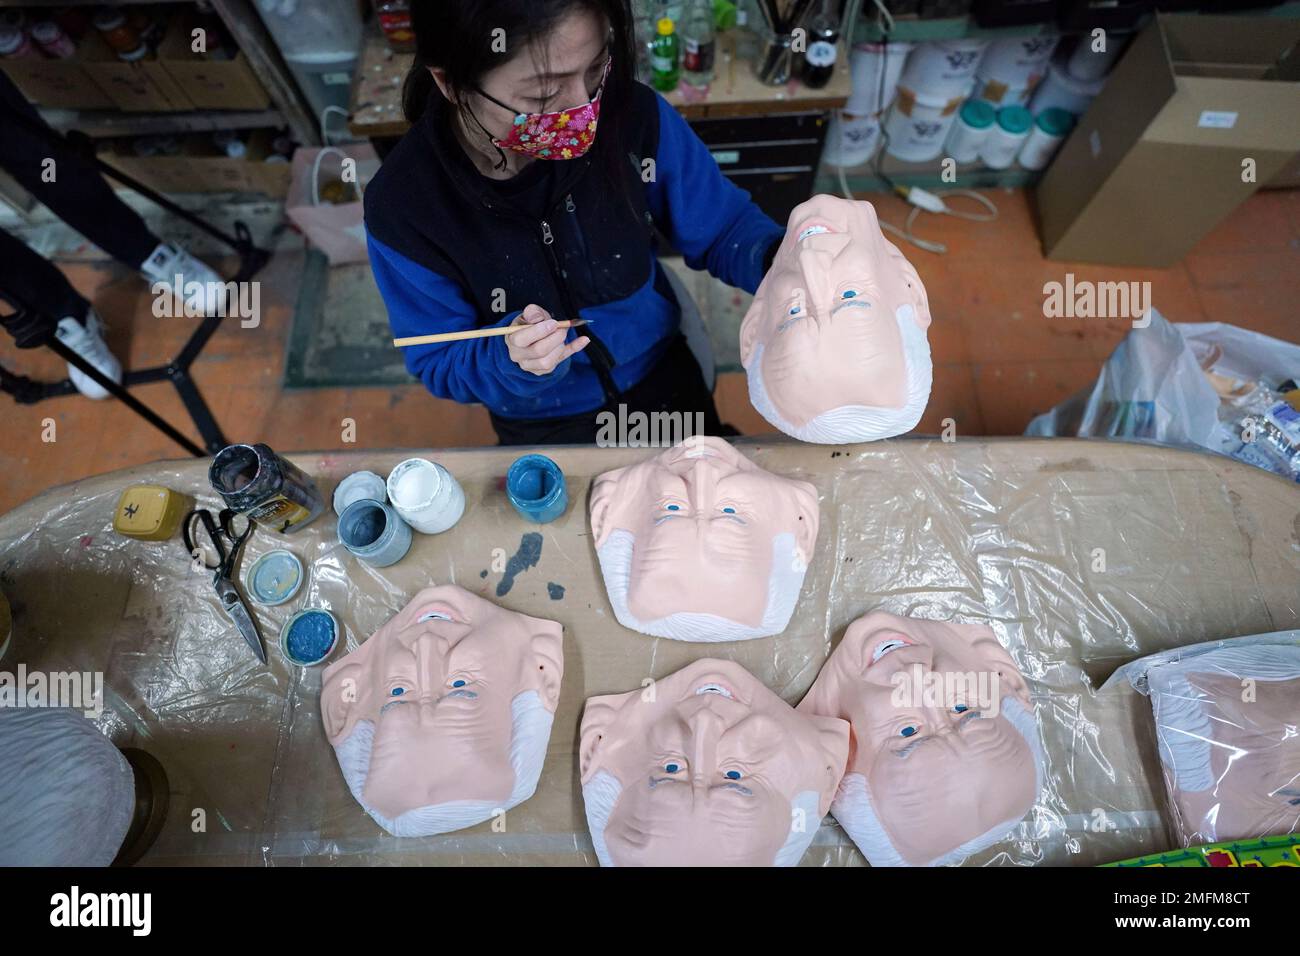 Workers of Ogawa Studios Co. are making rubber face masks of